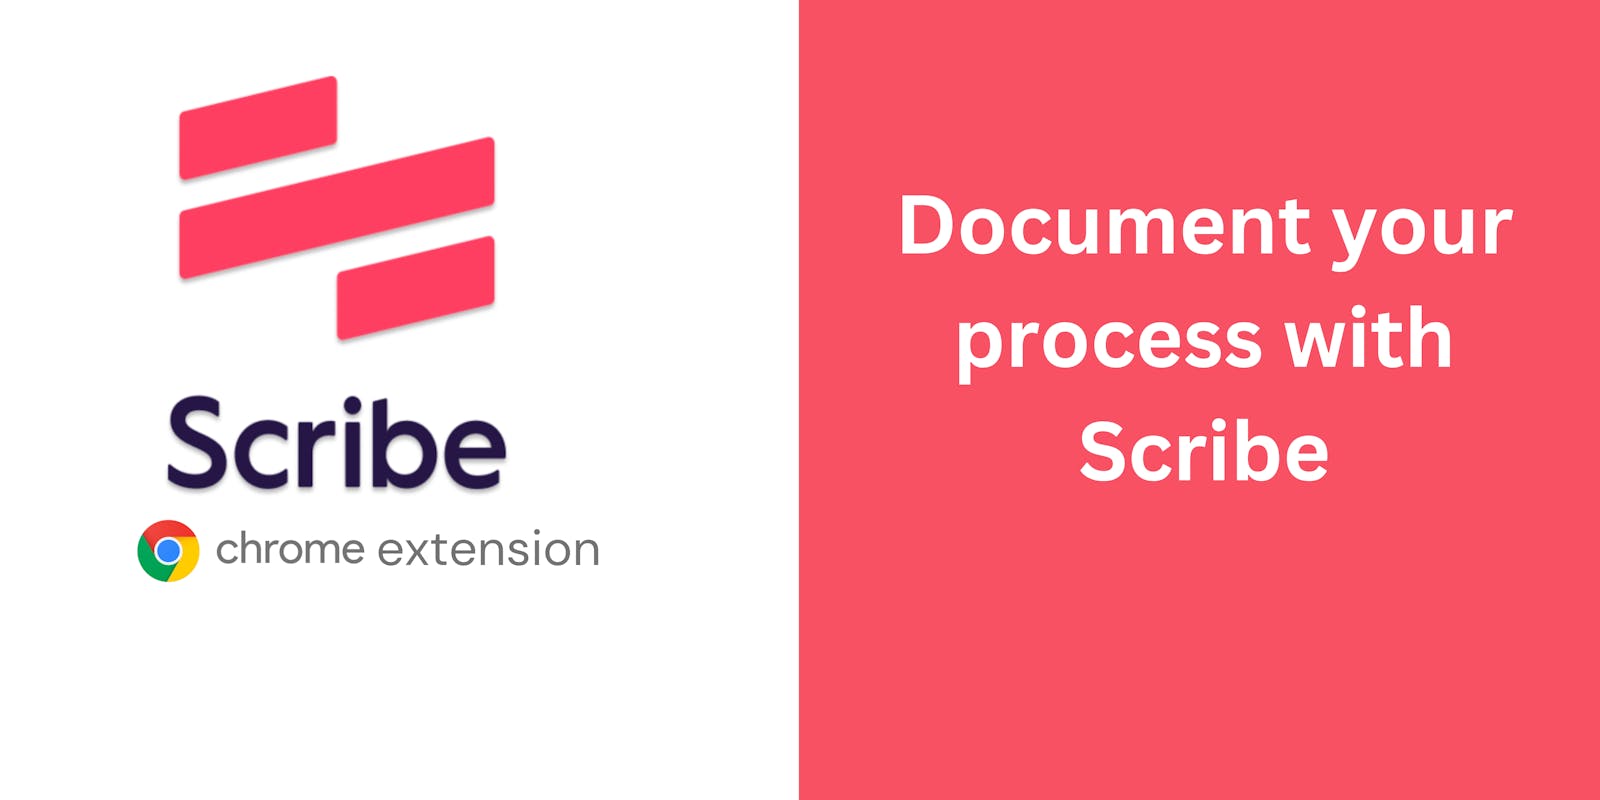 Scribe Chrome Extension: The Ultimate Tool for Documenting Your Processes